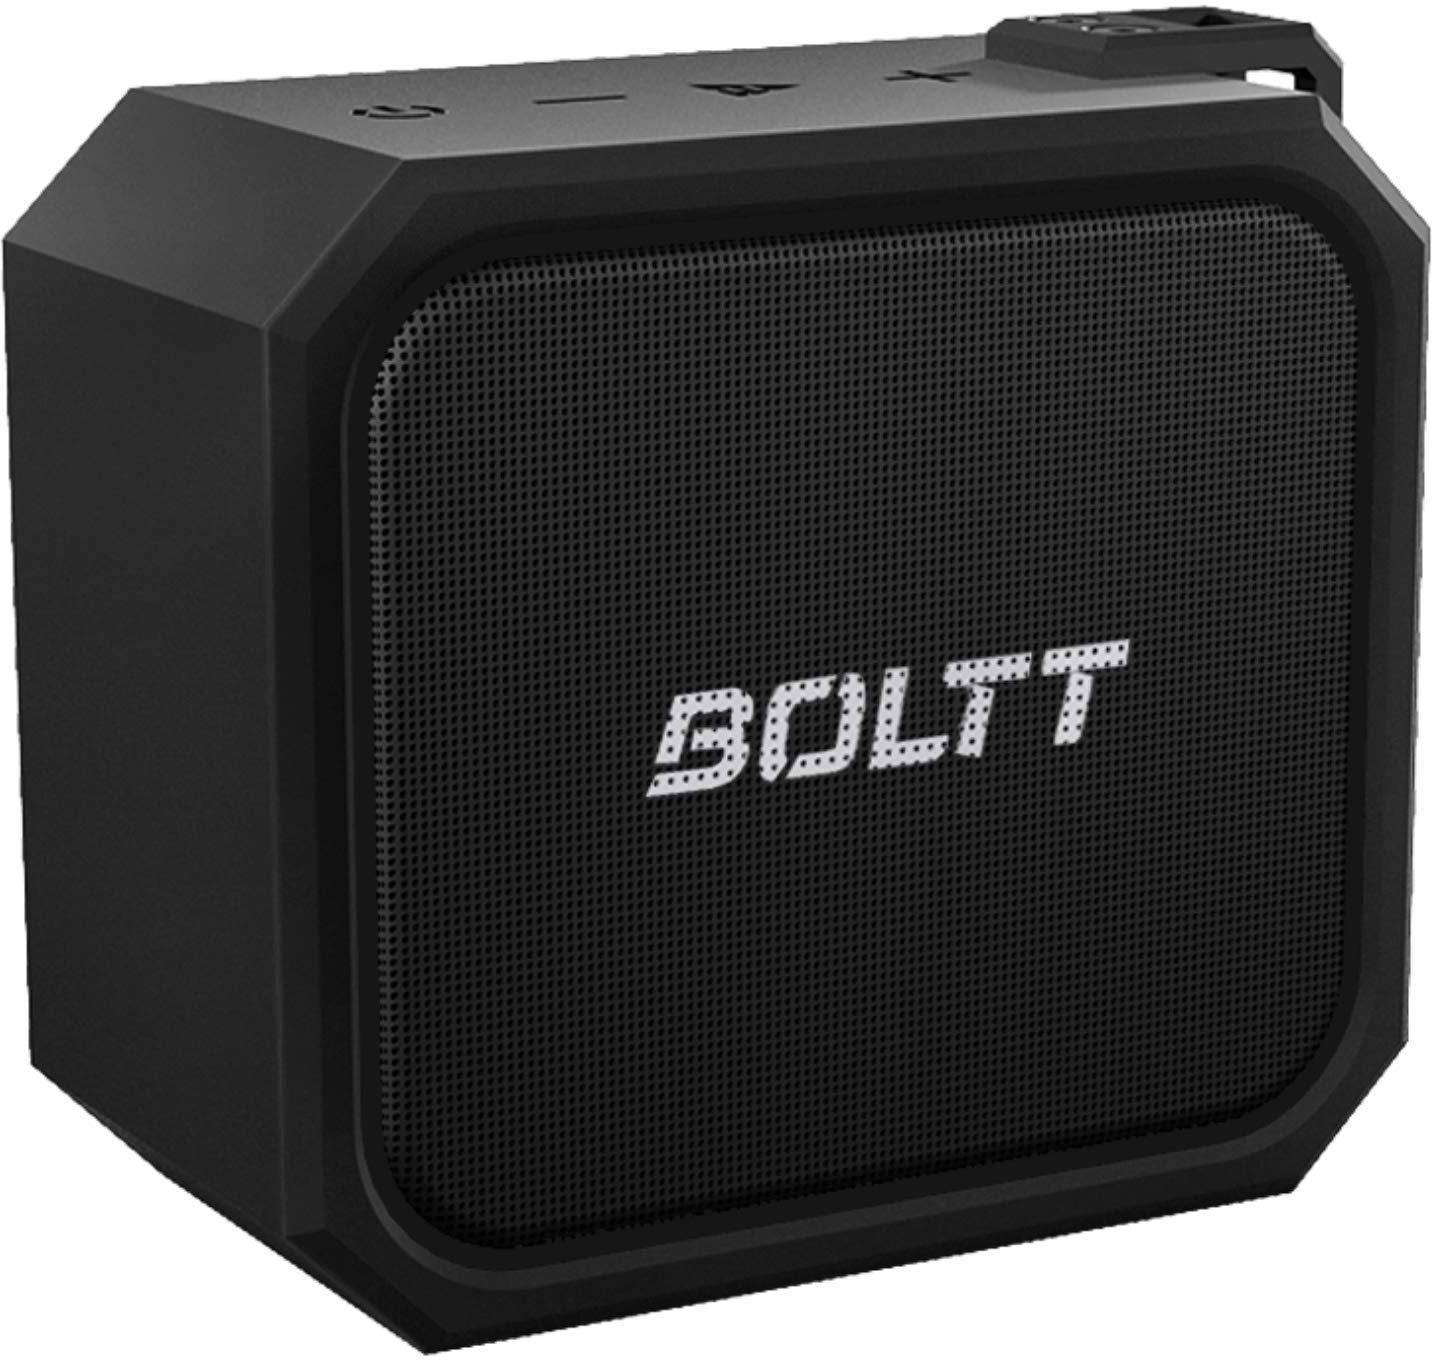 Fire Boltt Xplode 1100 Bluetooth Speakers zoom image